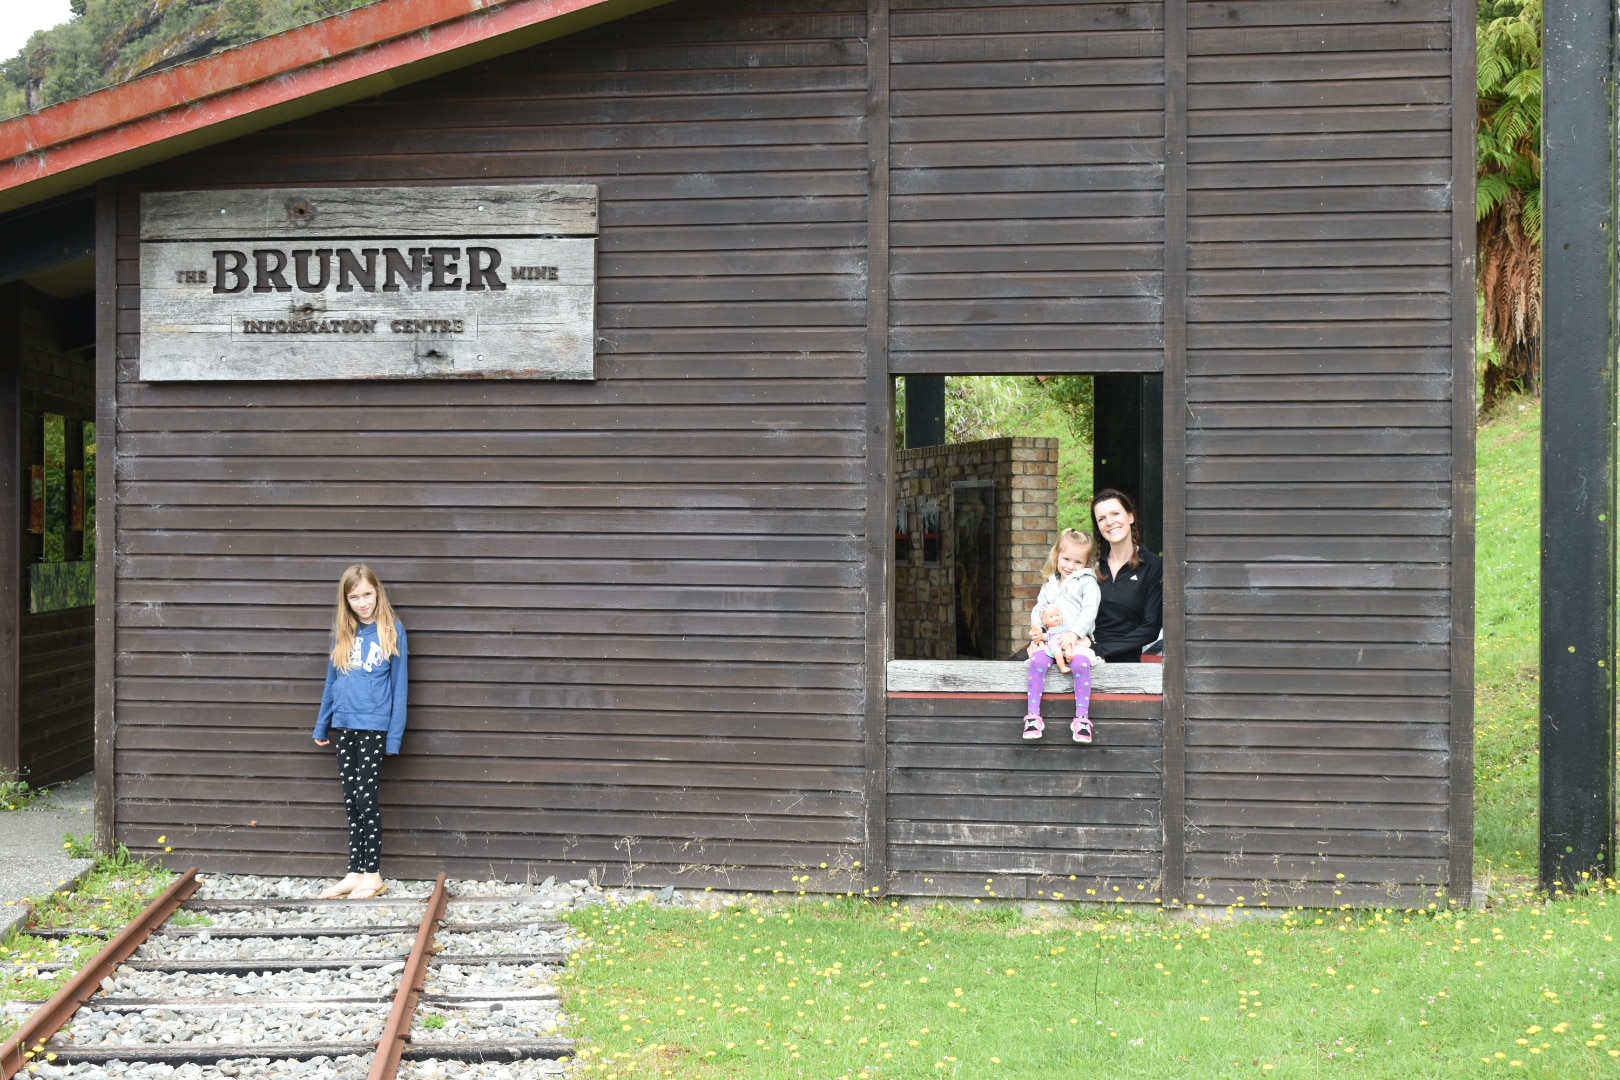 A mother and daughter pose in an open window at the Brunner, New Zealand, while another daughter stands nearby, on railroad tracks that lead toward a museum building on the site.